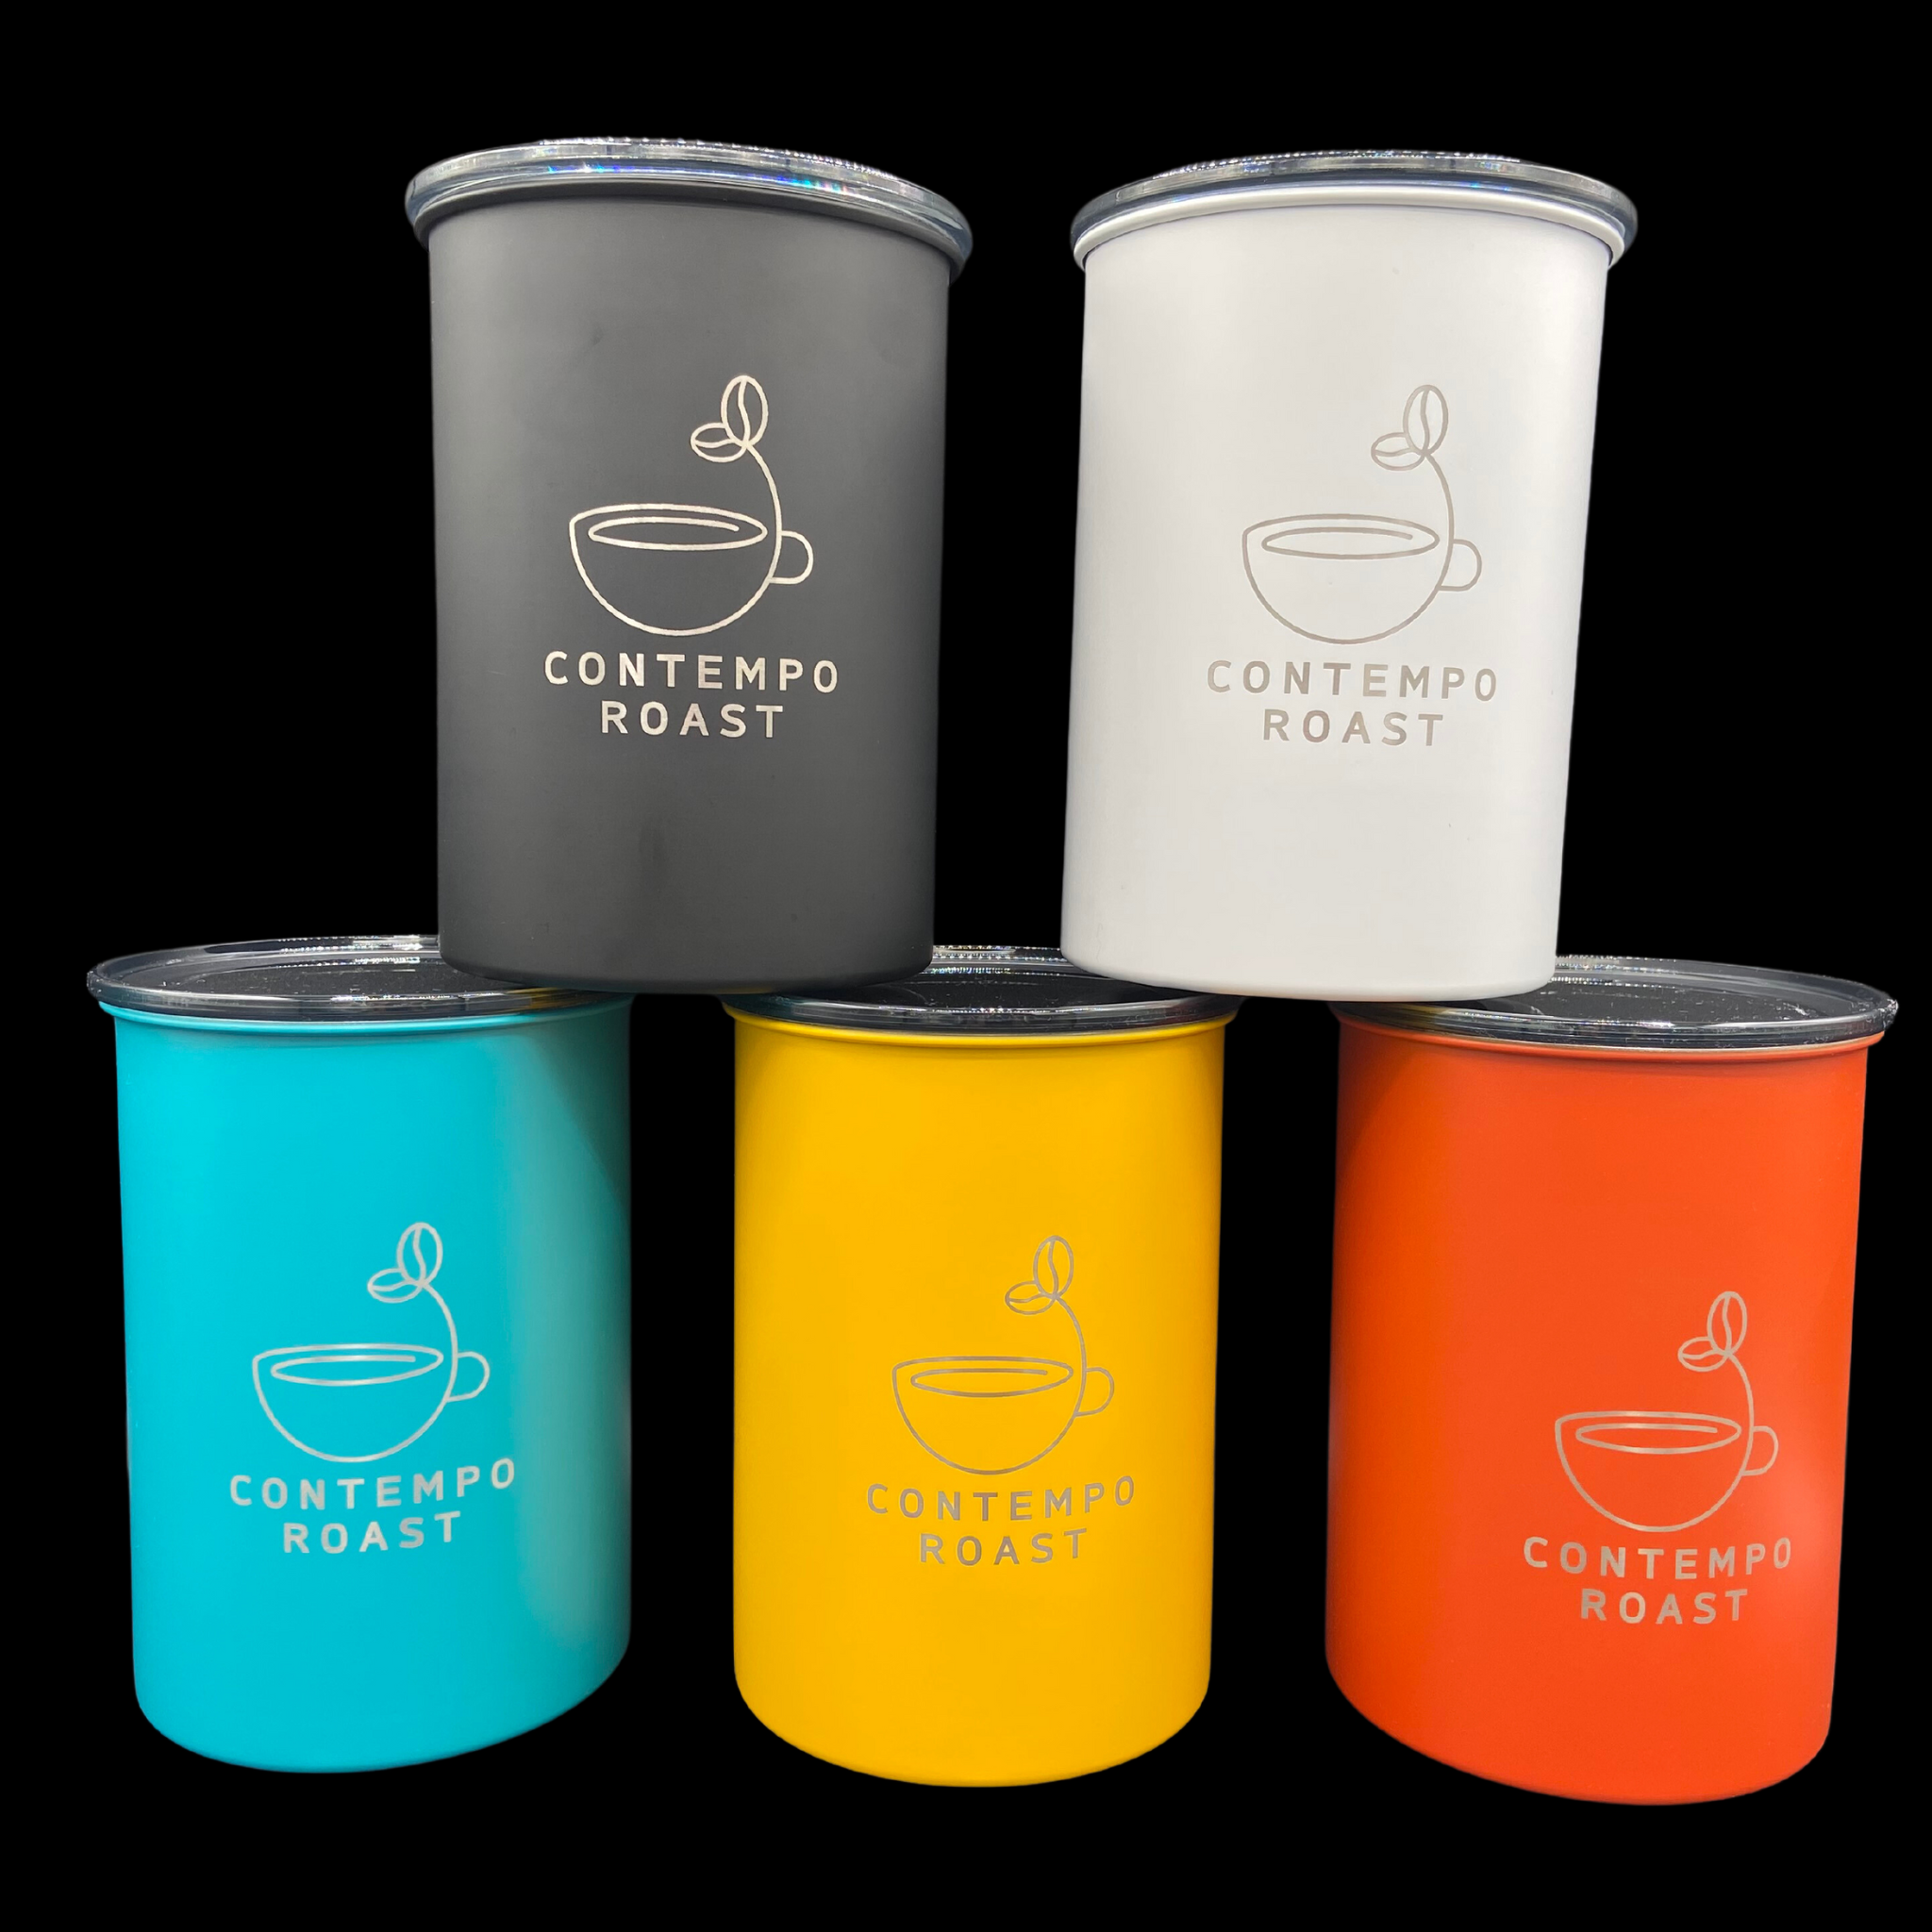 matte white, matte black, matte turquoise, matte yellow and matte red rock canisters etched with the ContempoRoast logo, the black and white canisters stacked atop the turquoise, yellow and red rock